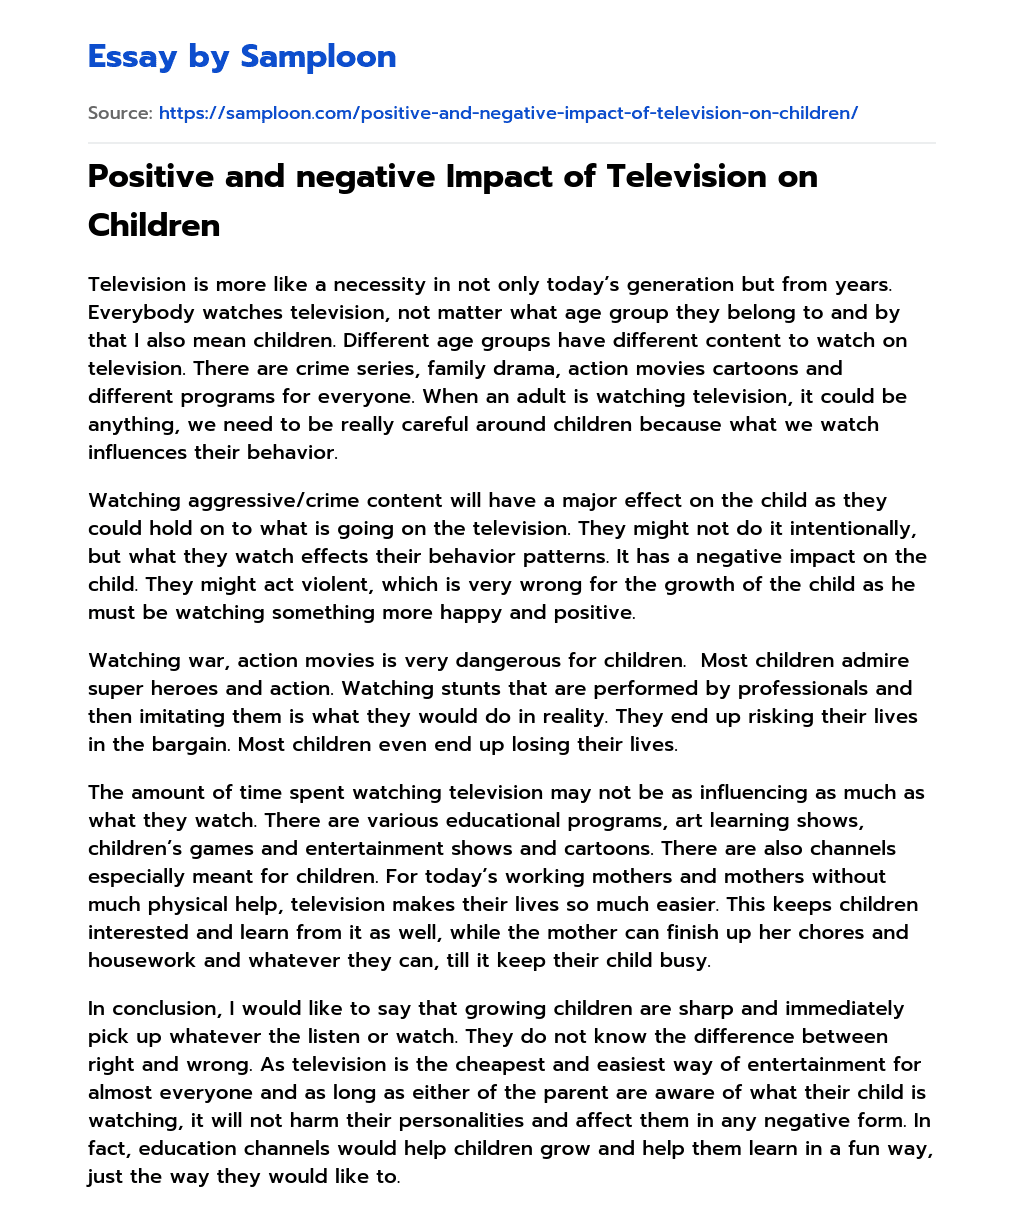 Positive and negative Impact of Television on Children essay